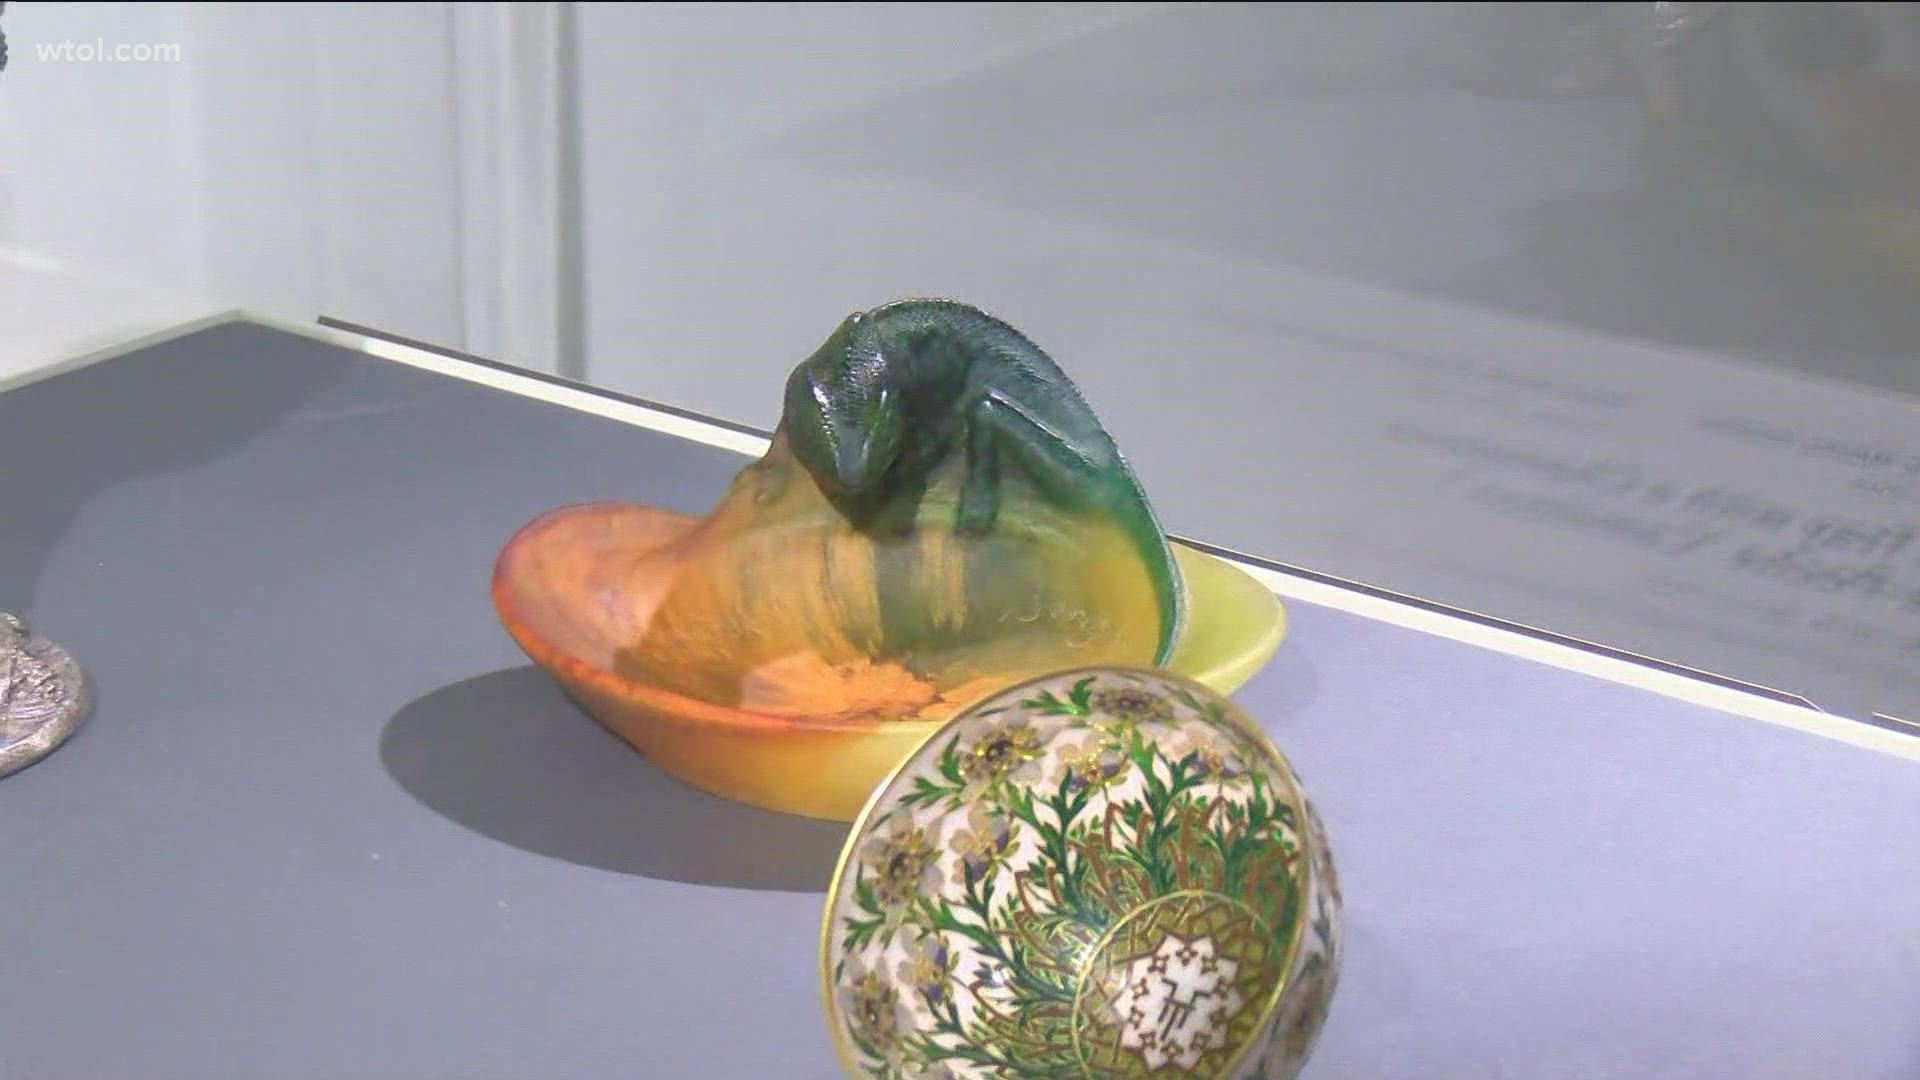 Chameleon Effects: Glass (Un)Defined examines innovation in glass art throughout history.